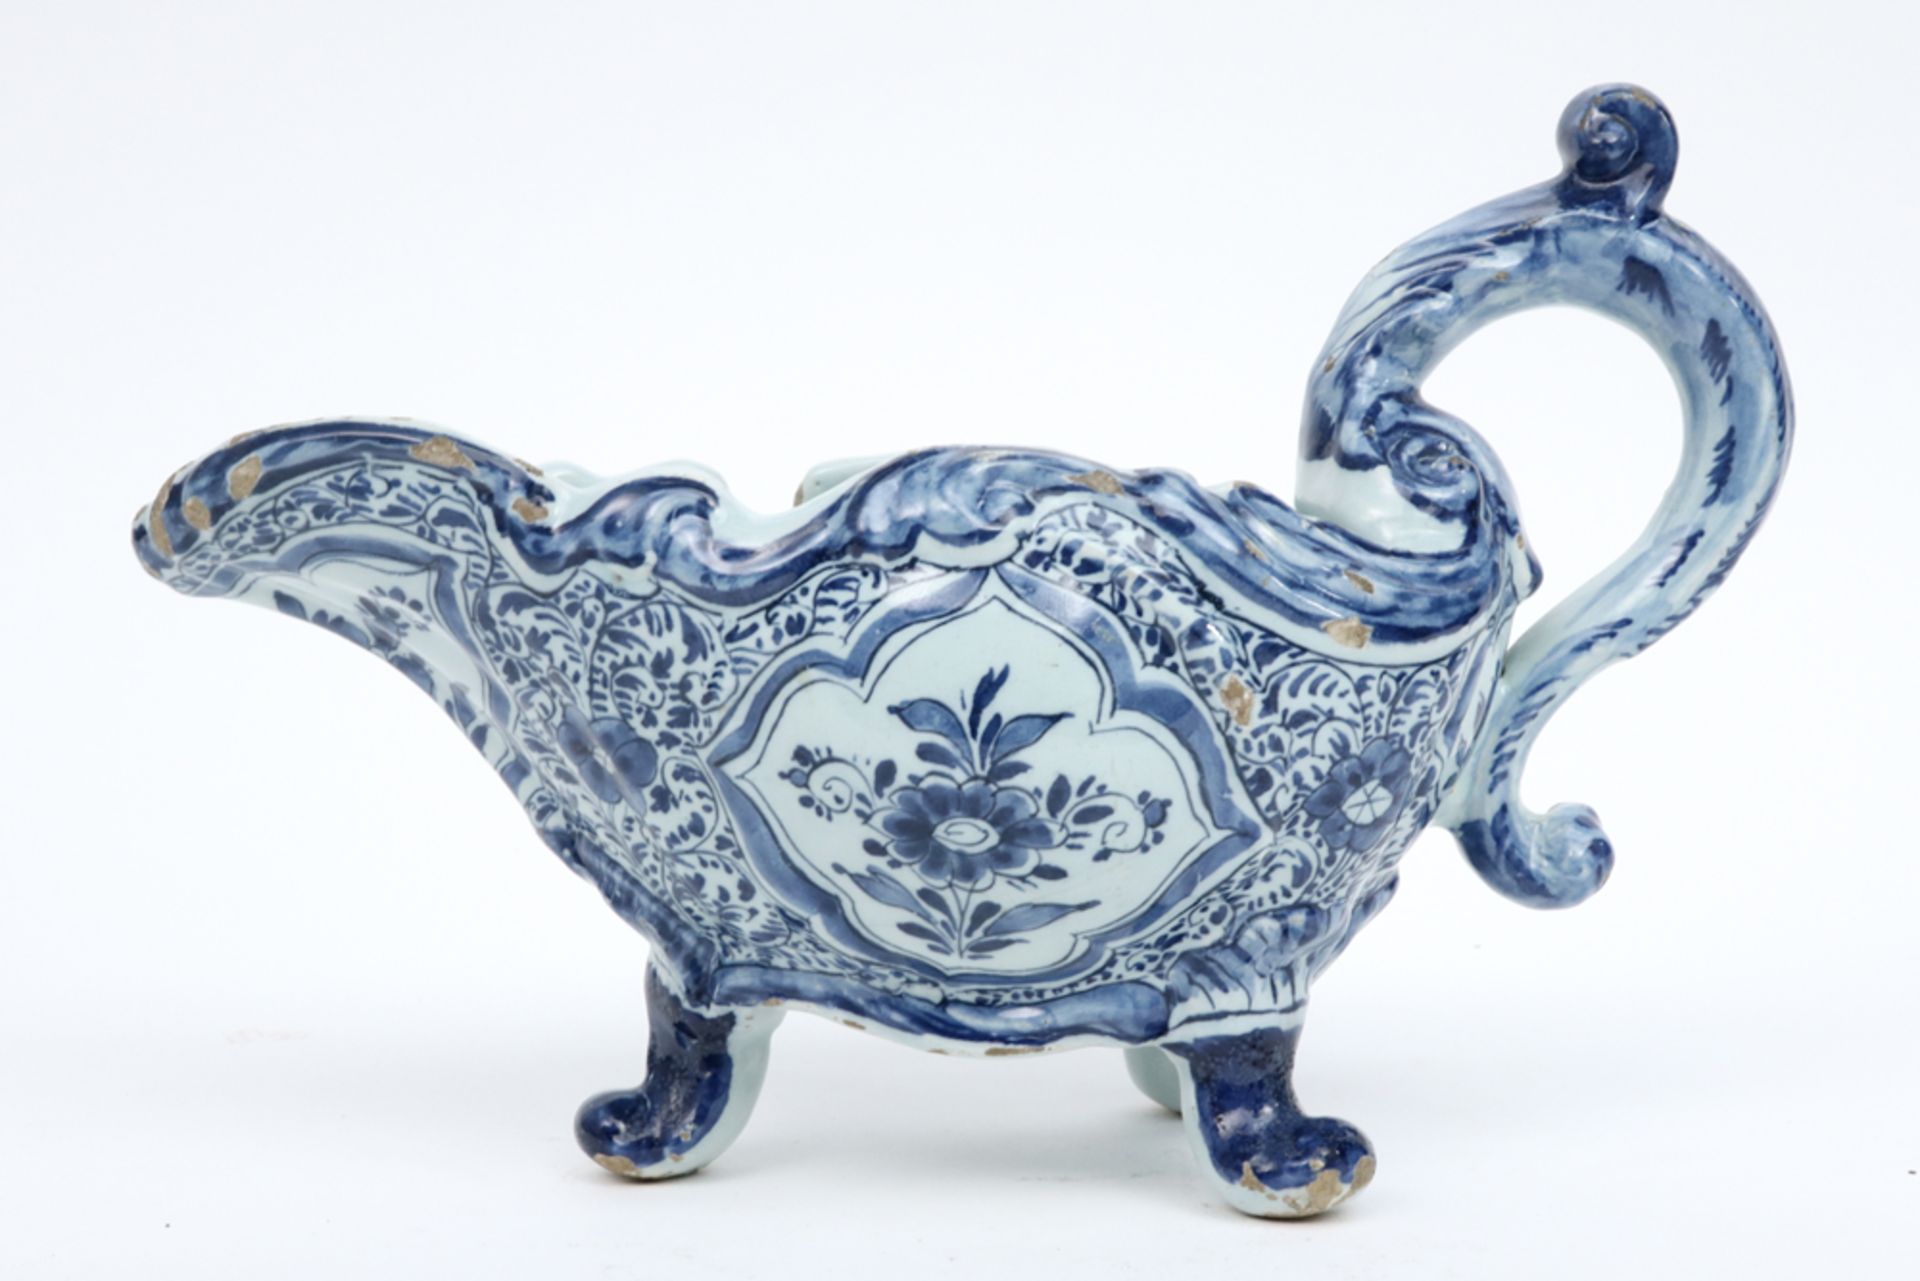 18th Cent. sauce boat in marked ceramic from Delft with a blue-white decor || Achttiende eeuwse - Bild 2 aus 4